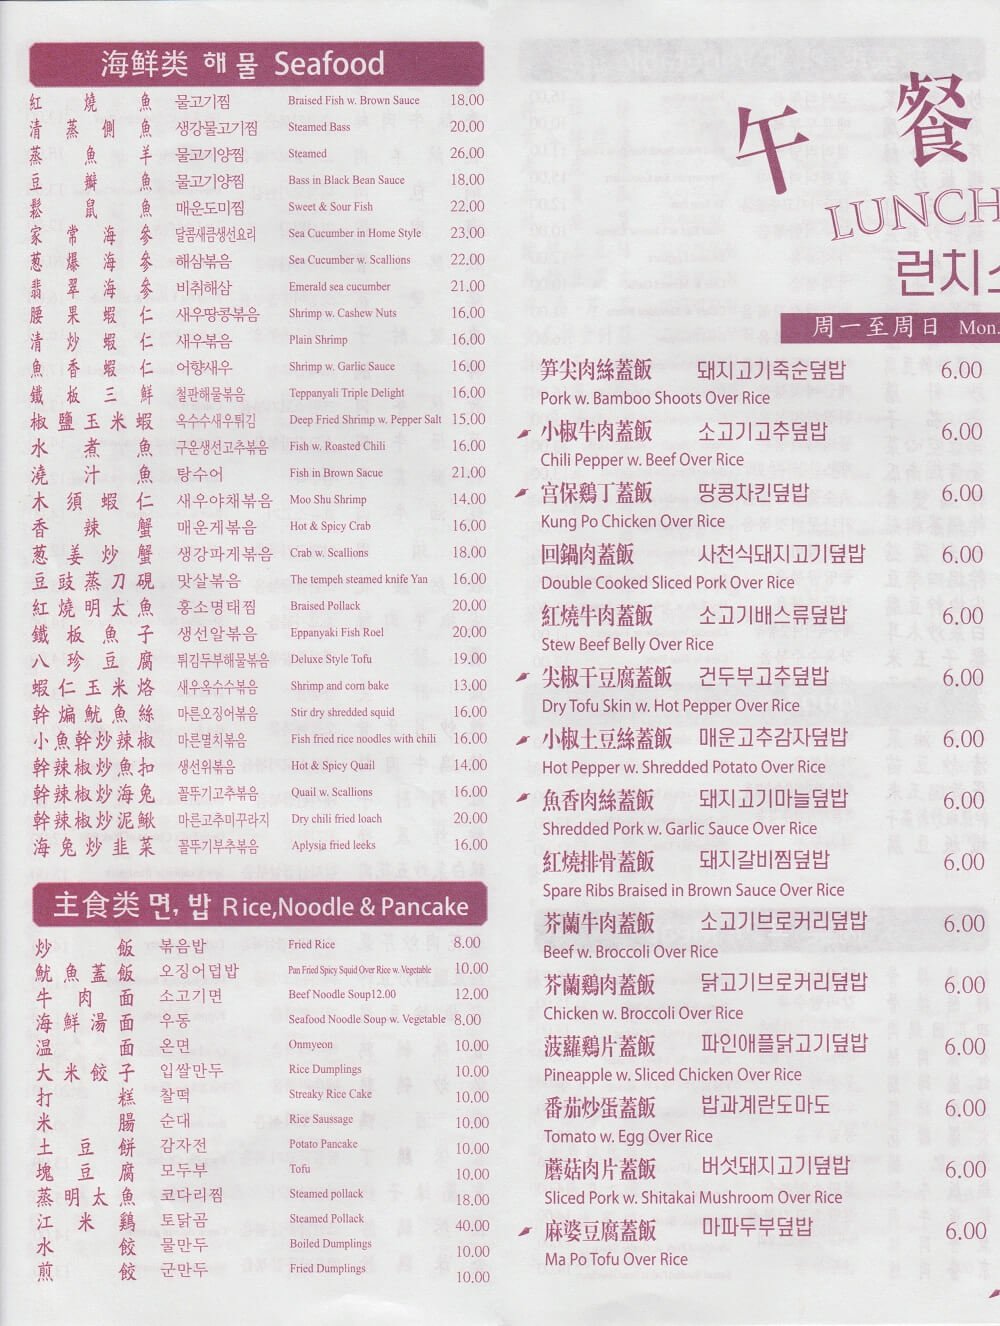 Scan 1